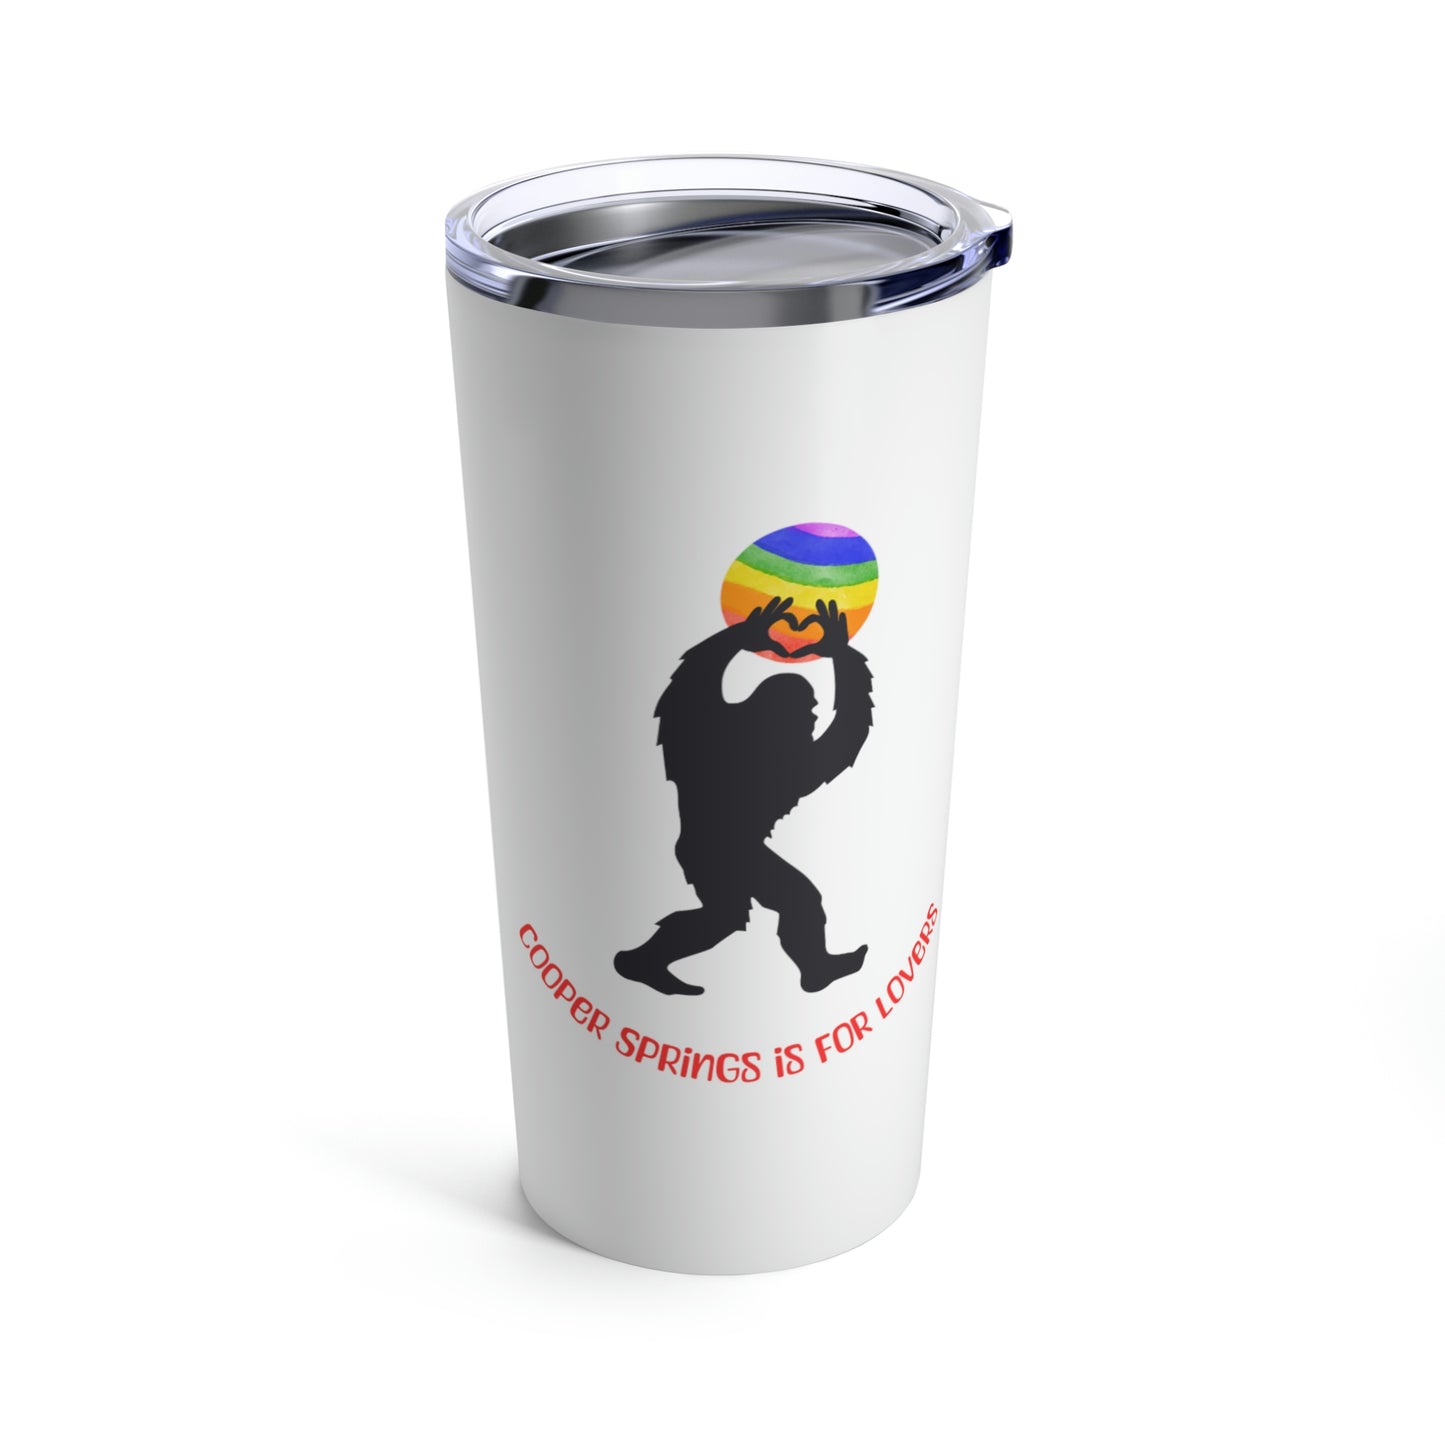 Cooper Springs Is For Lovers 20oz tumbler